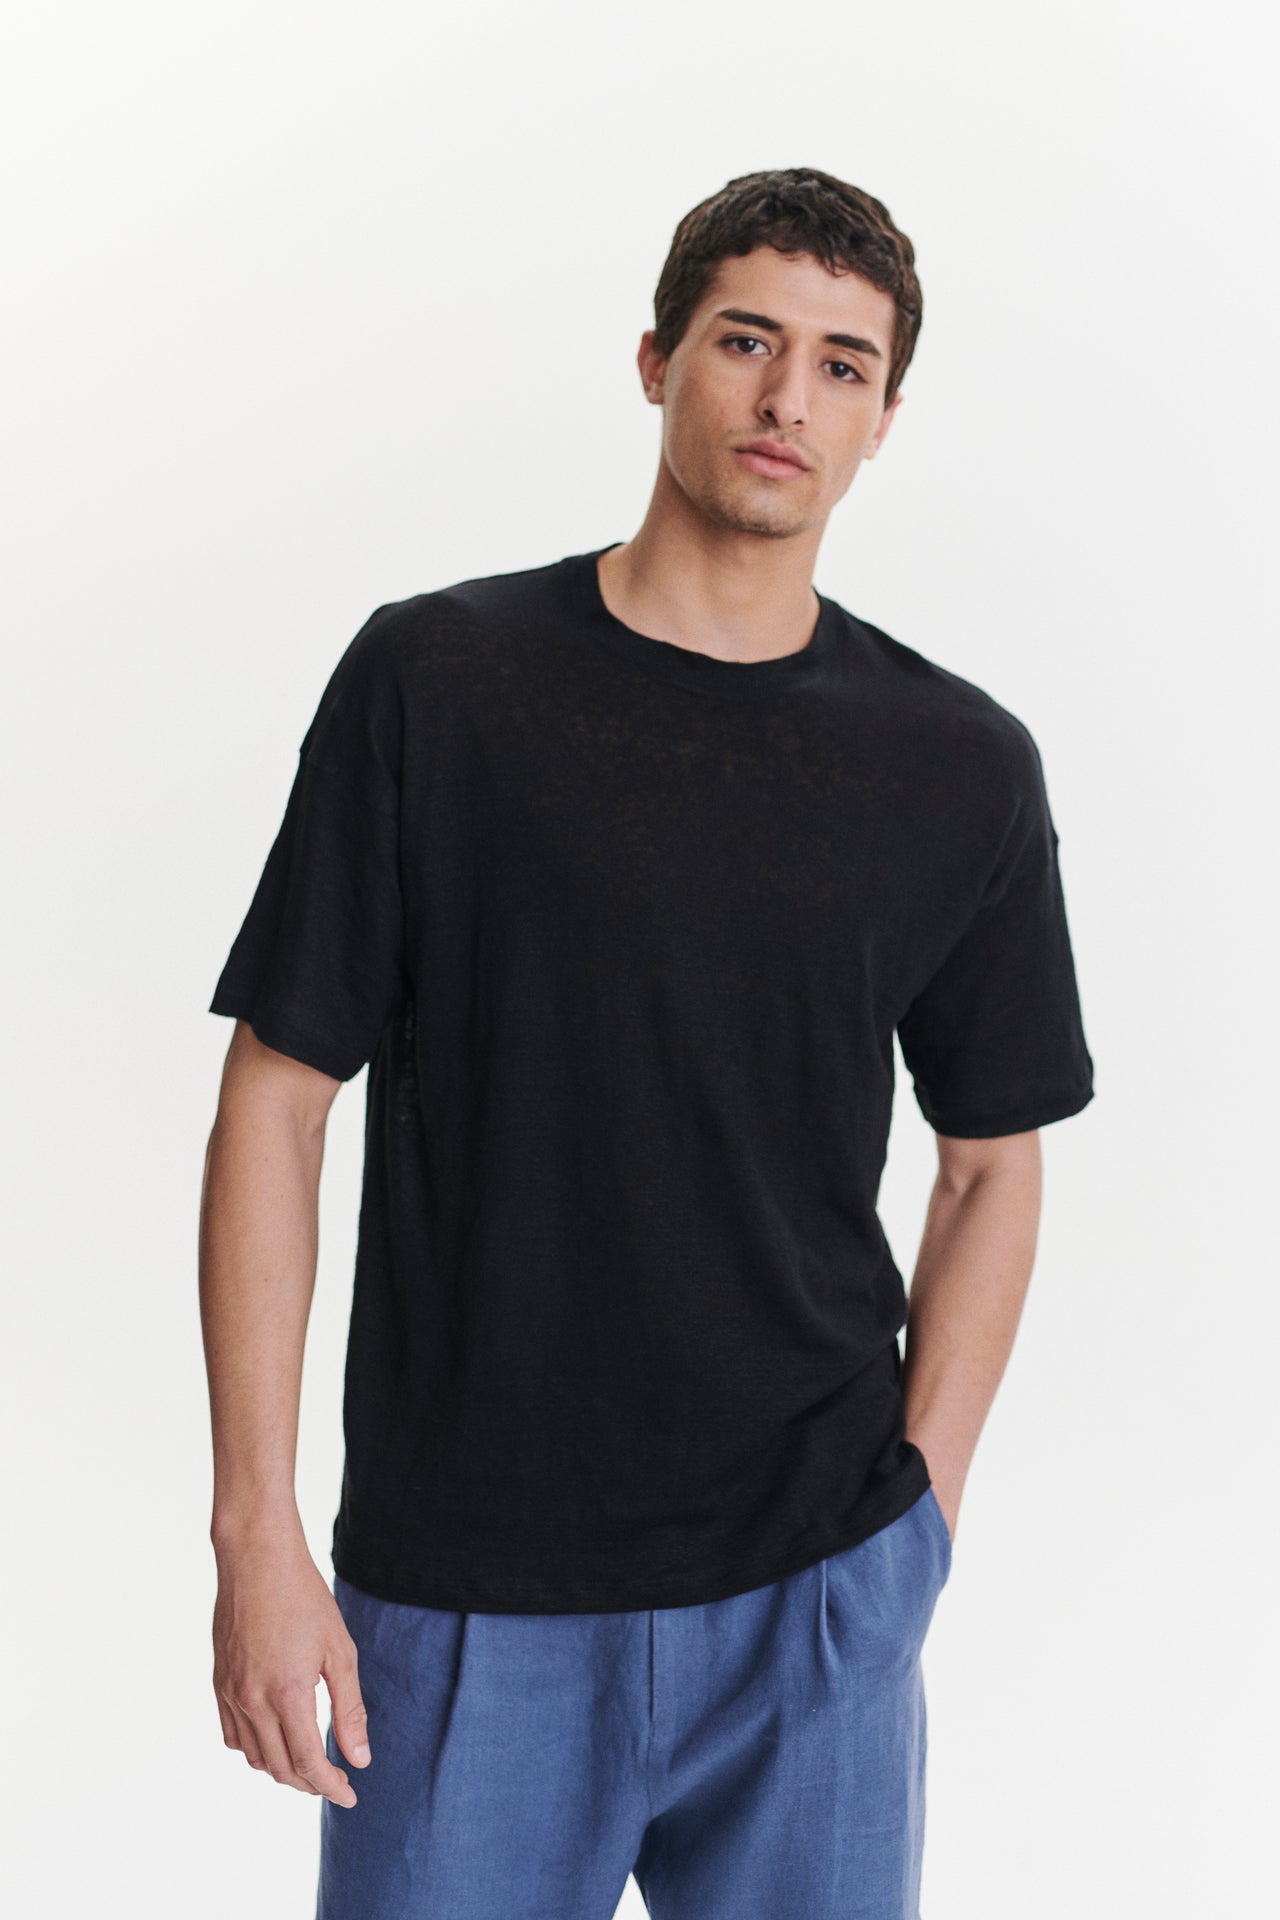 T-Shirt in a Black Lithuanian airy Linen Jersey